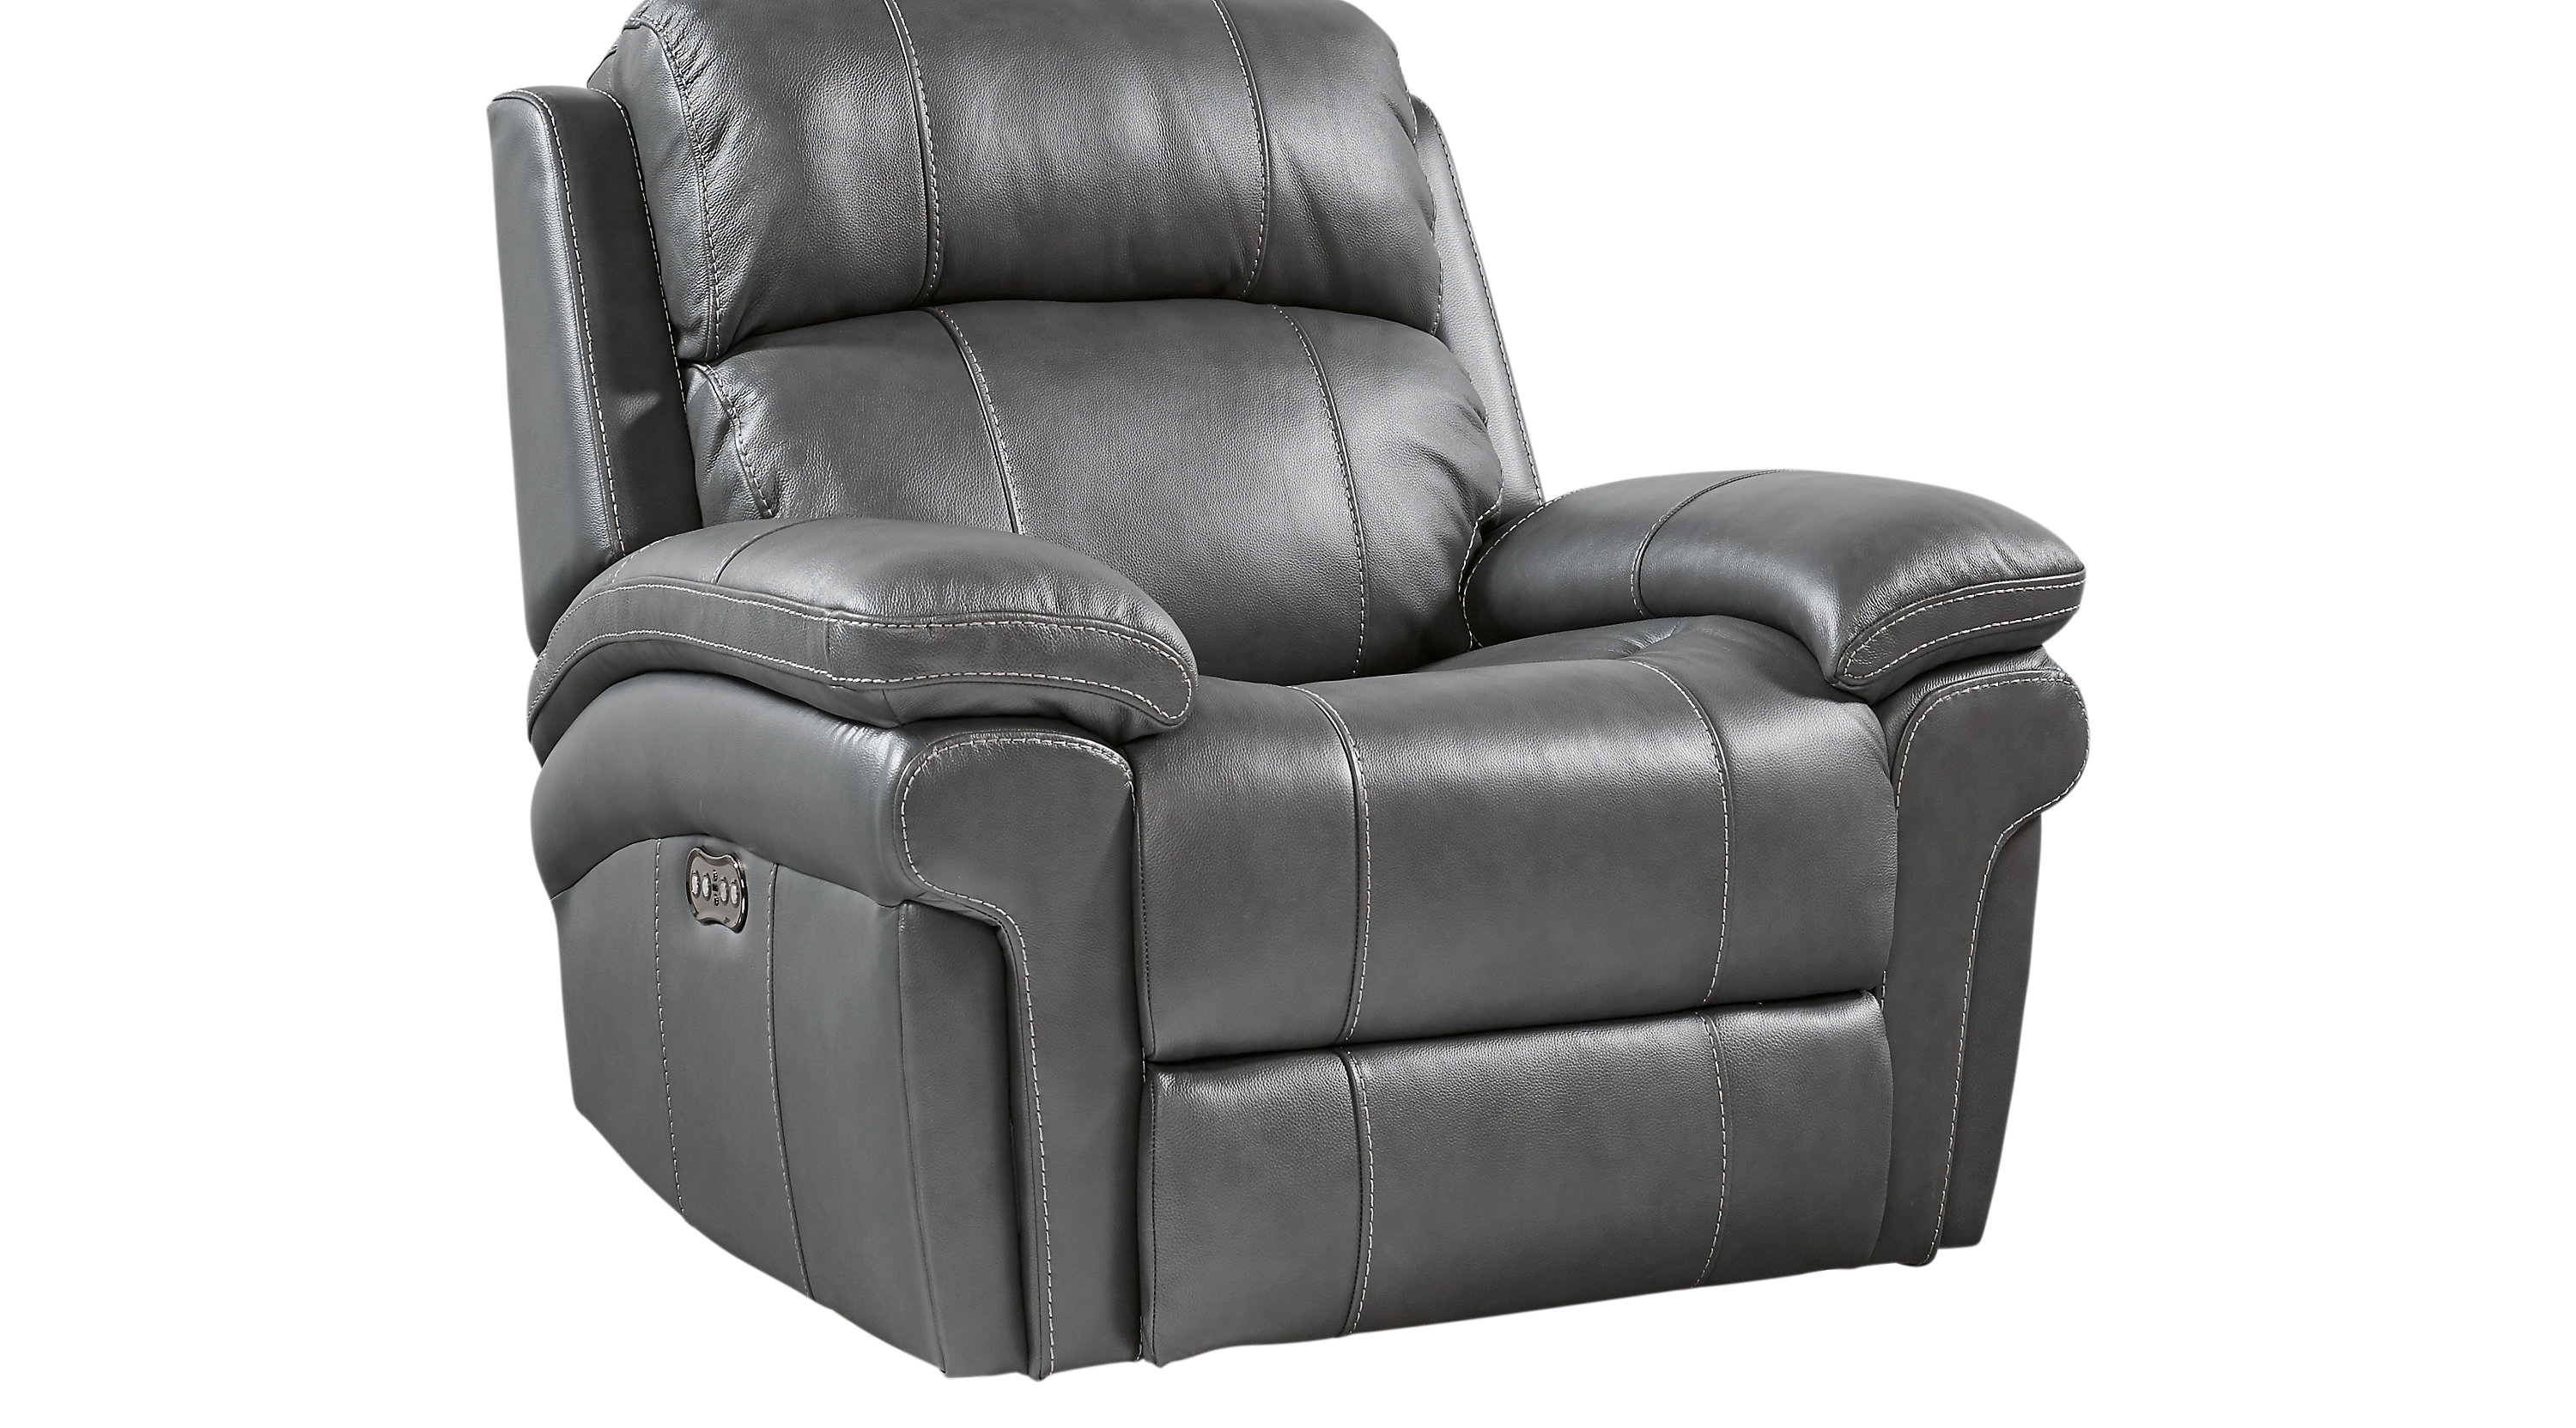 $799.99 - Trevino Smoke Leather Power Recliner - Reclining